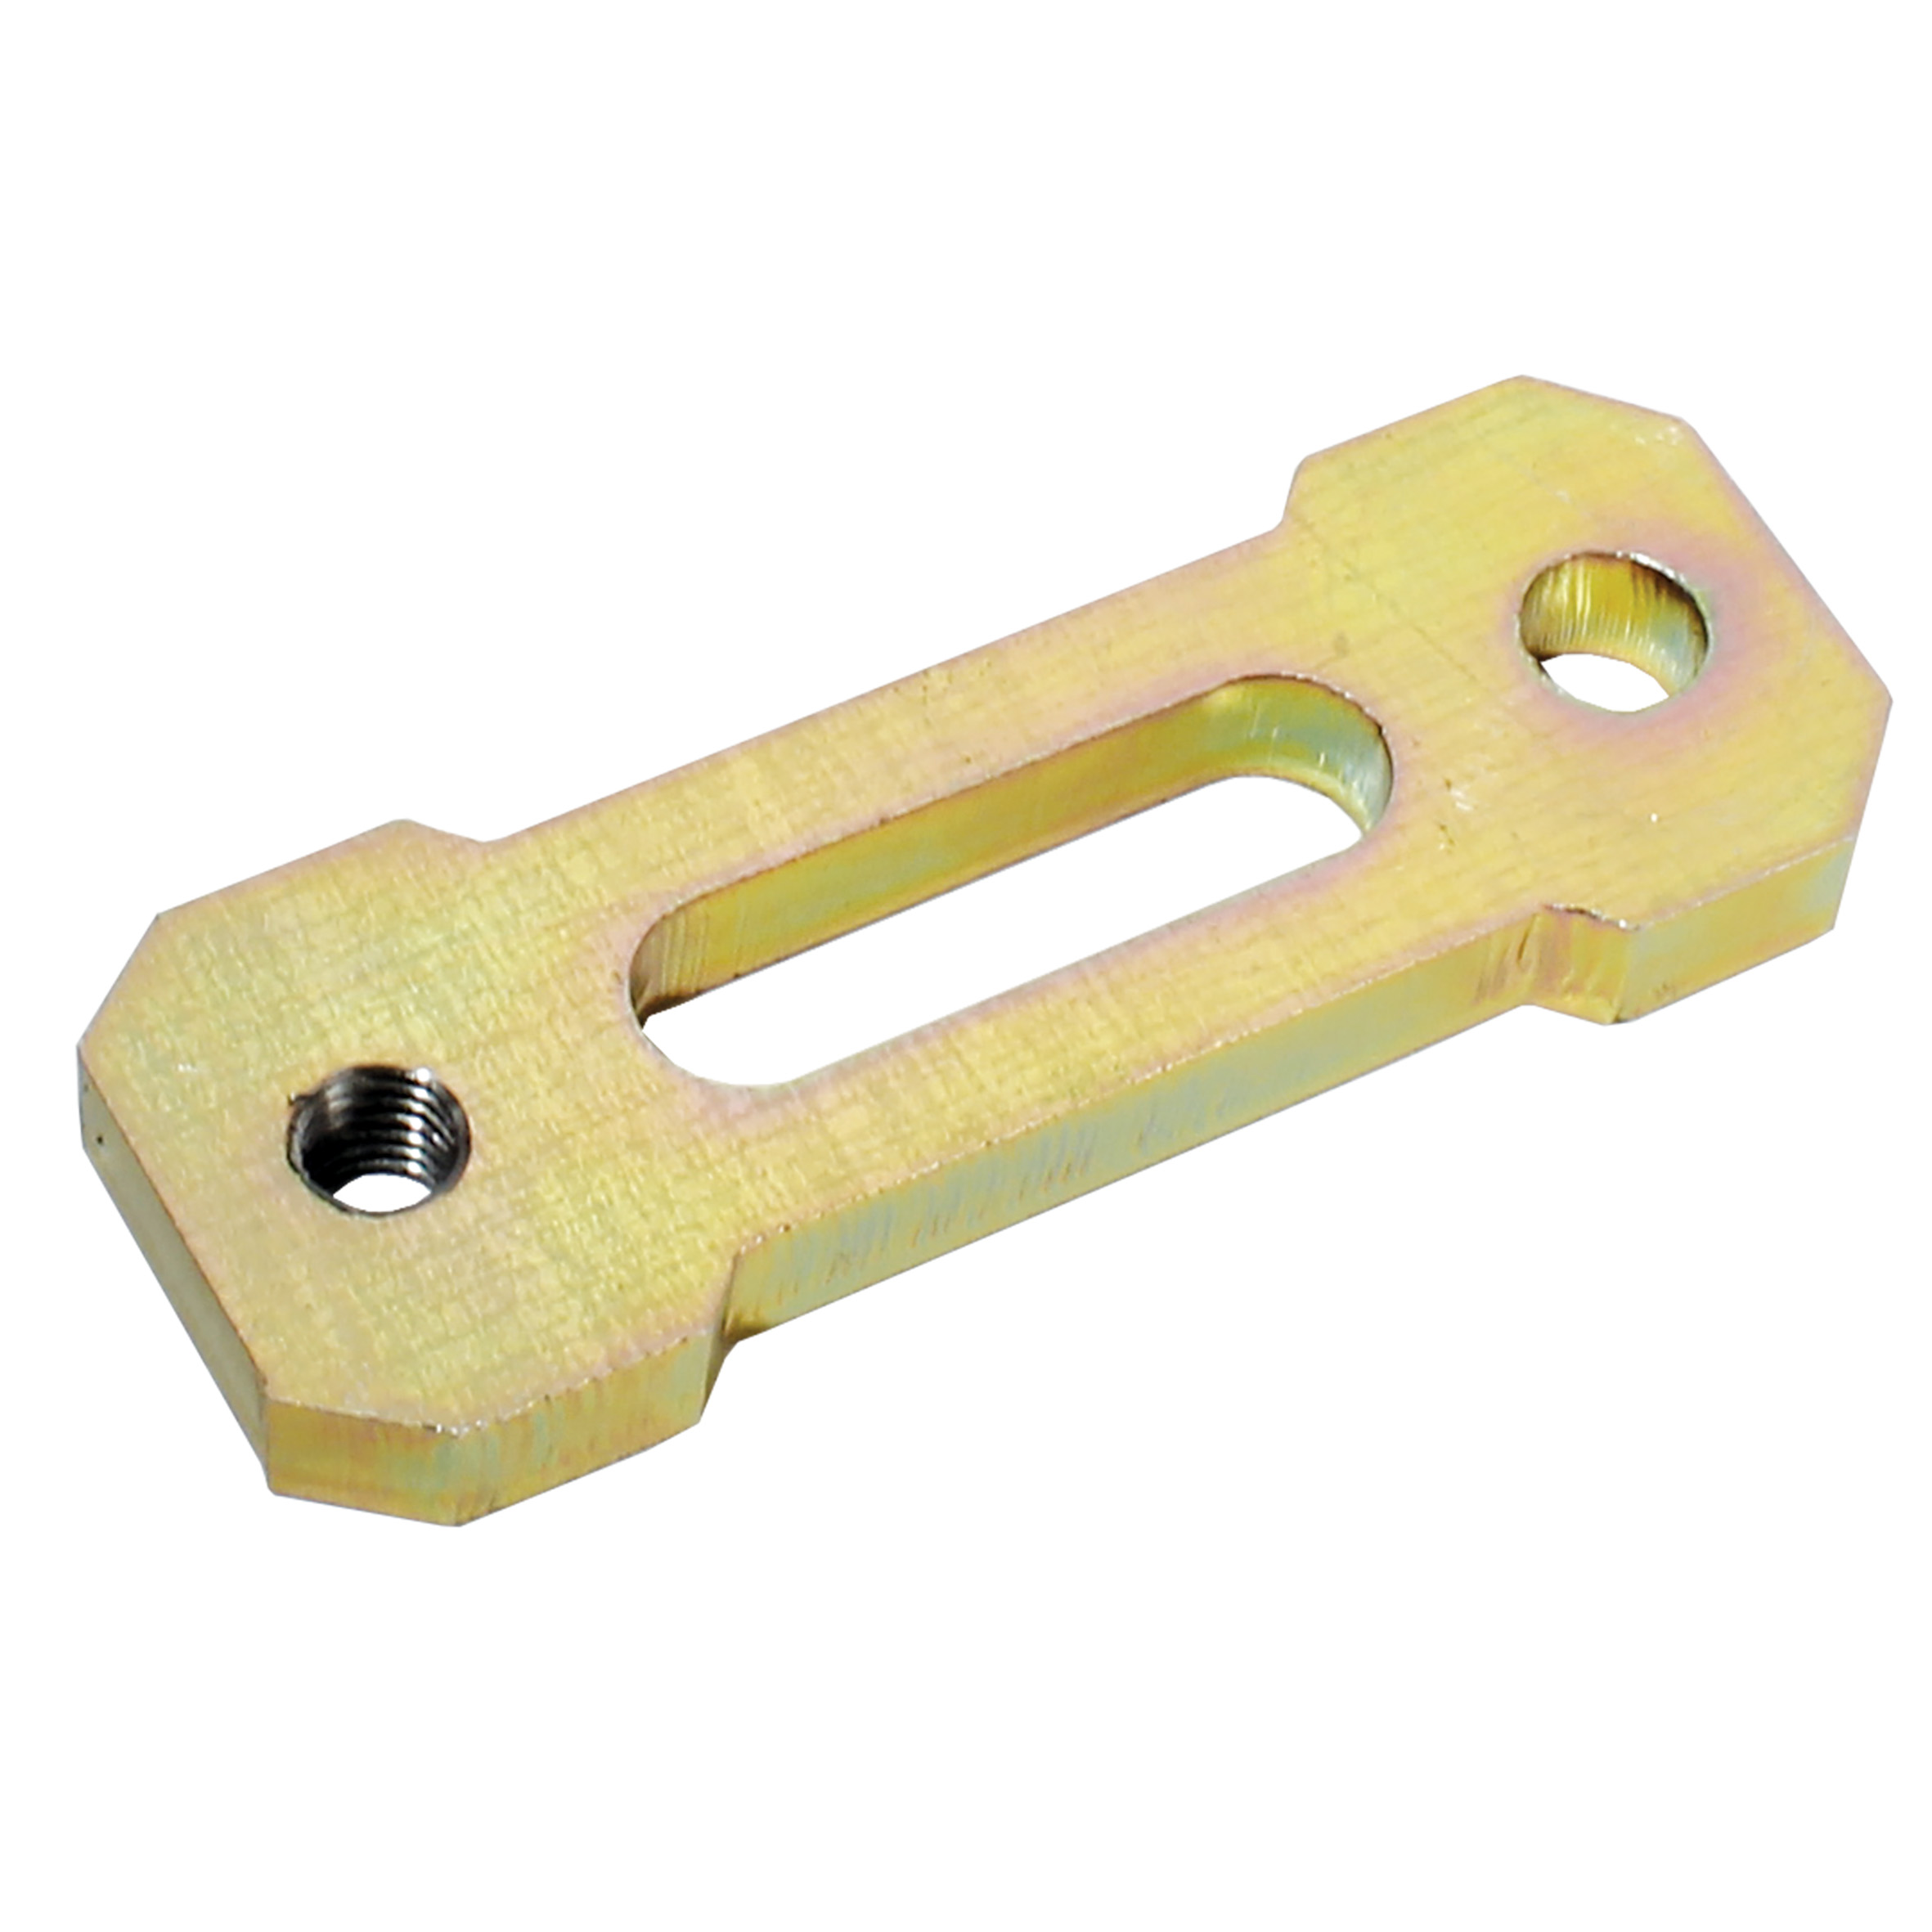 Rigid manual tensioner - Fixed - Galvanized steel - For use with belts